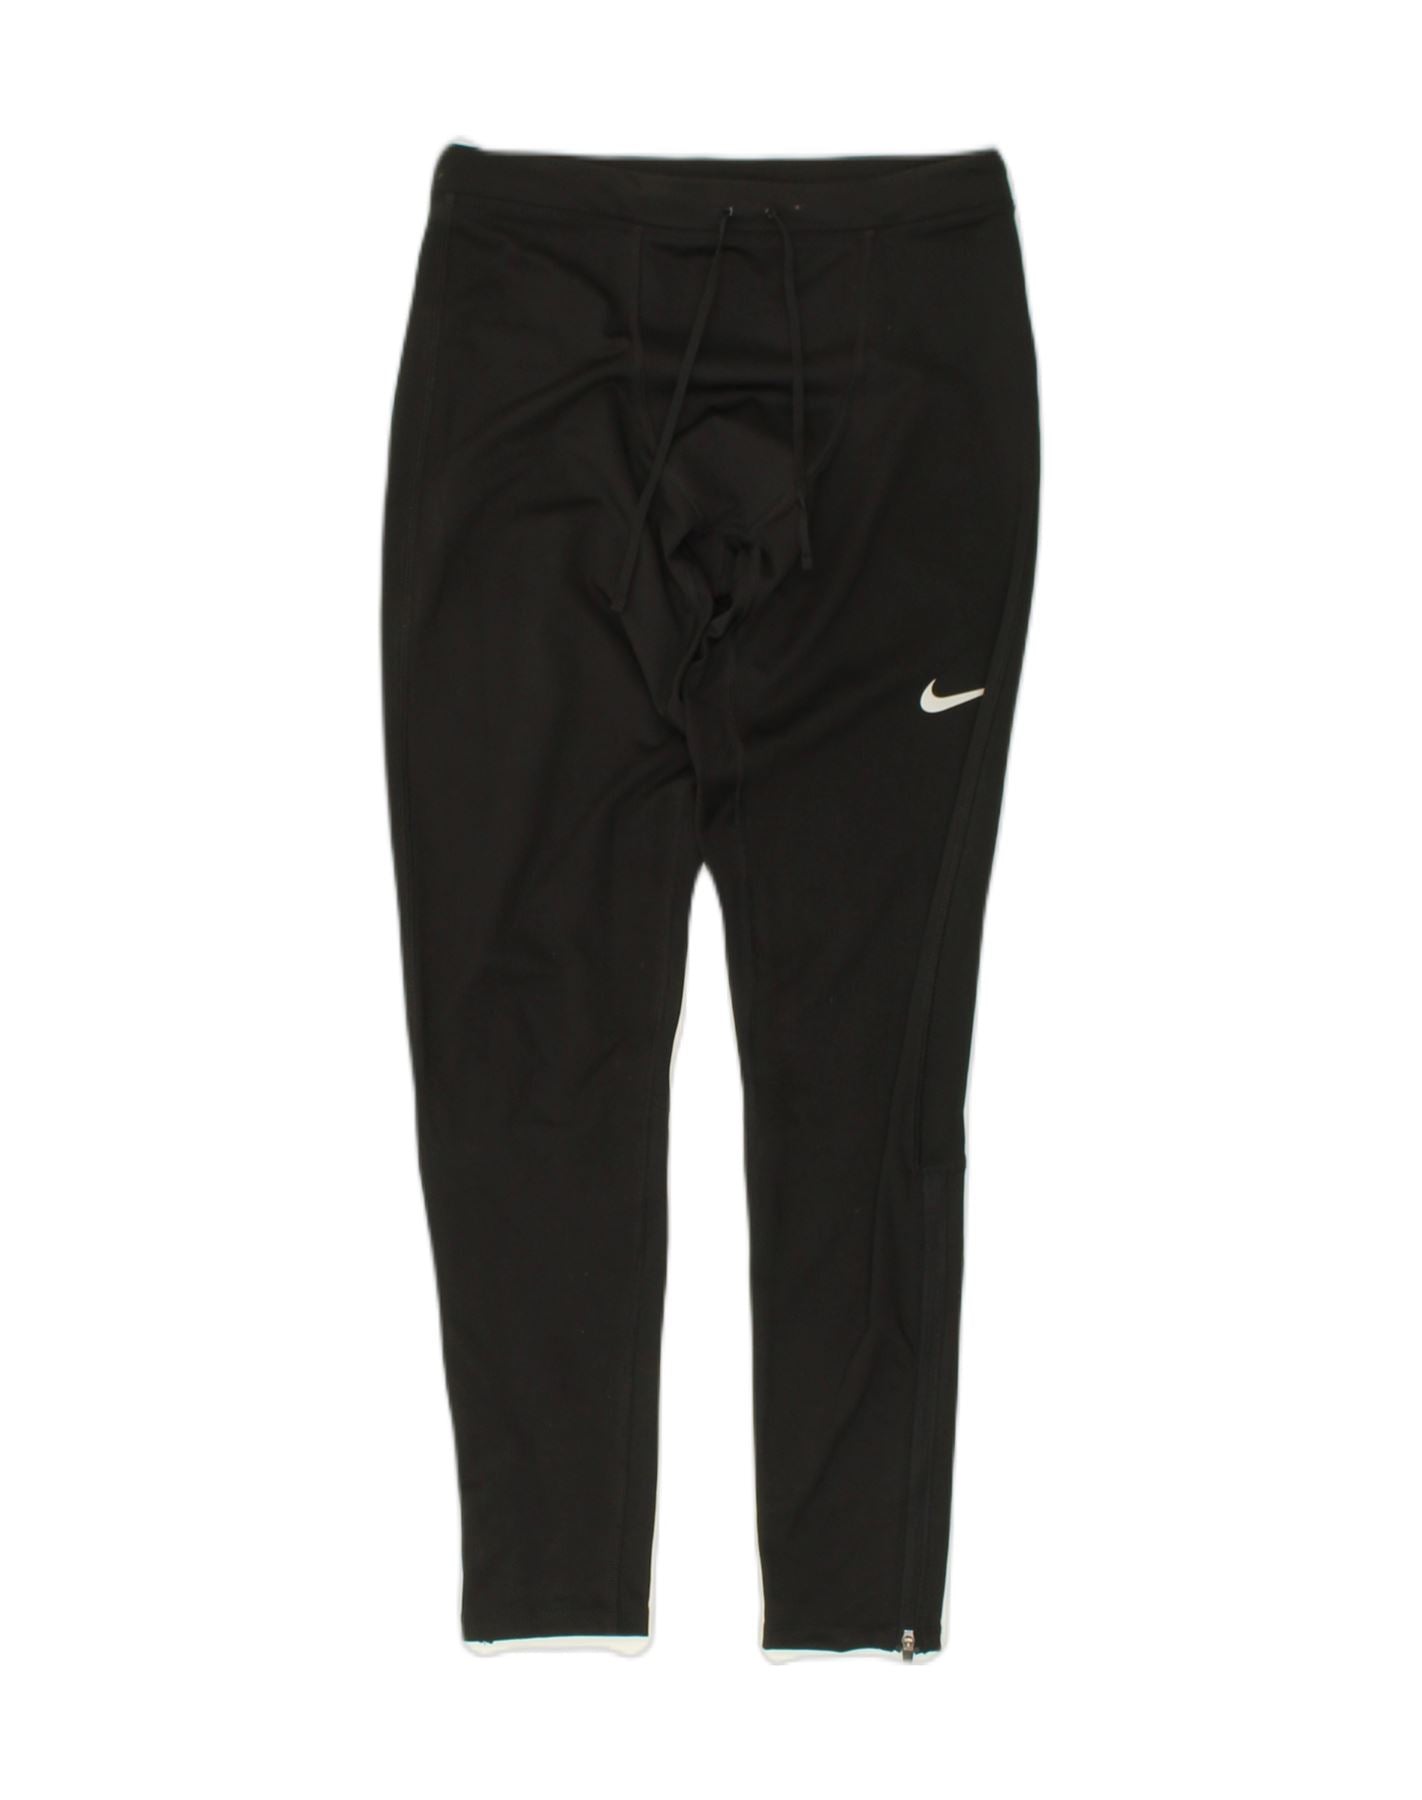 NIKE Womens Dri Fit Tracksuit Trousers UK 8 Small Black Polyester, Vintage  & Second-Hand Clothing Online